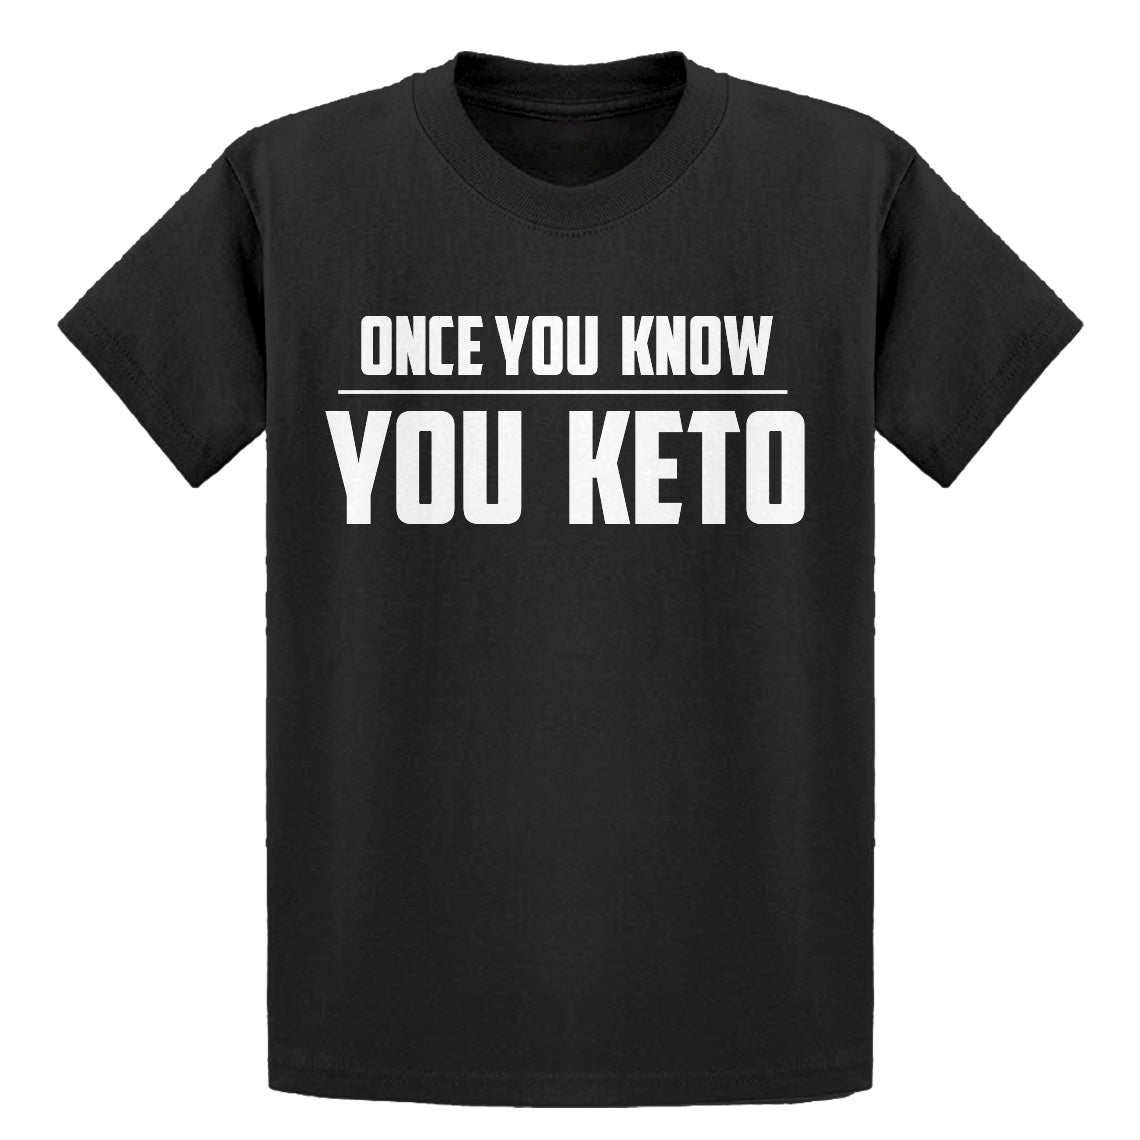 Youth Once You Know, You Keto Kids T-shirt